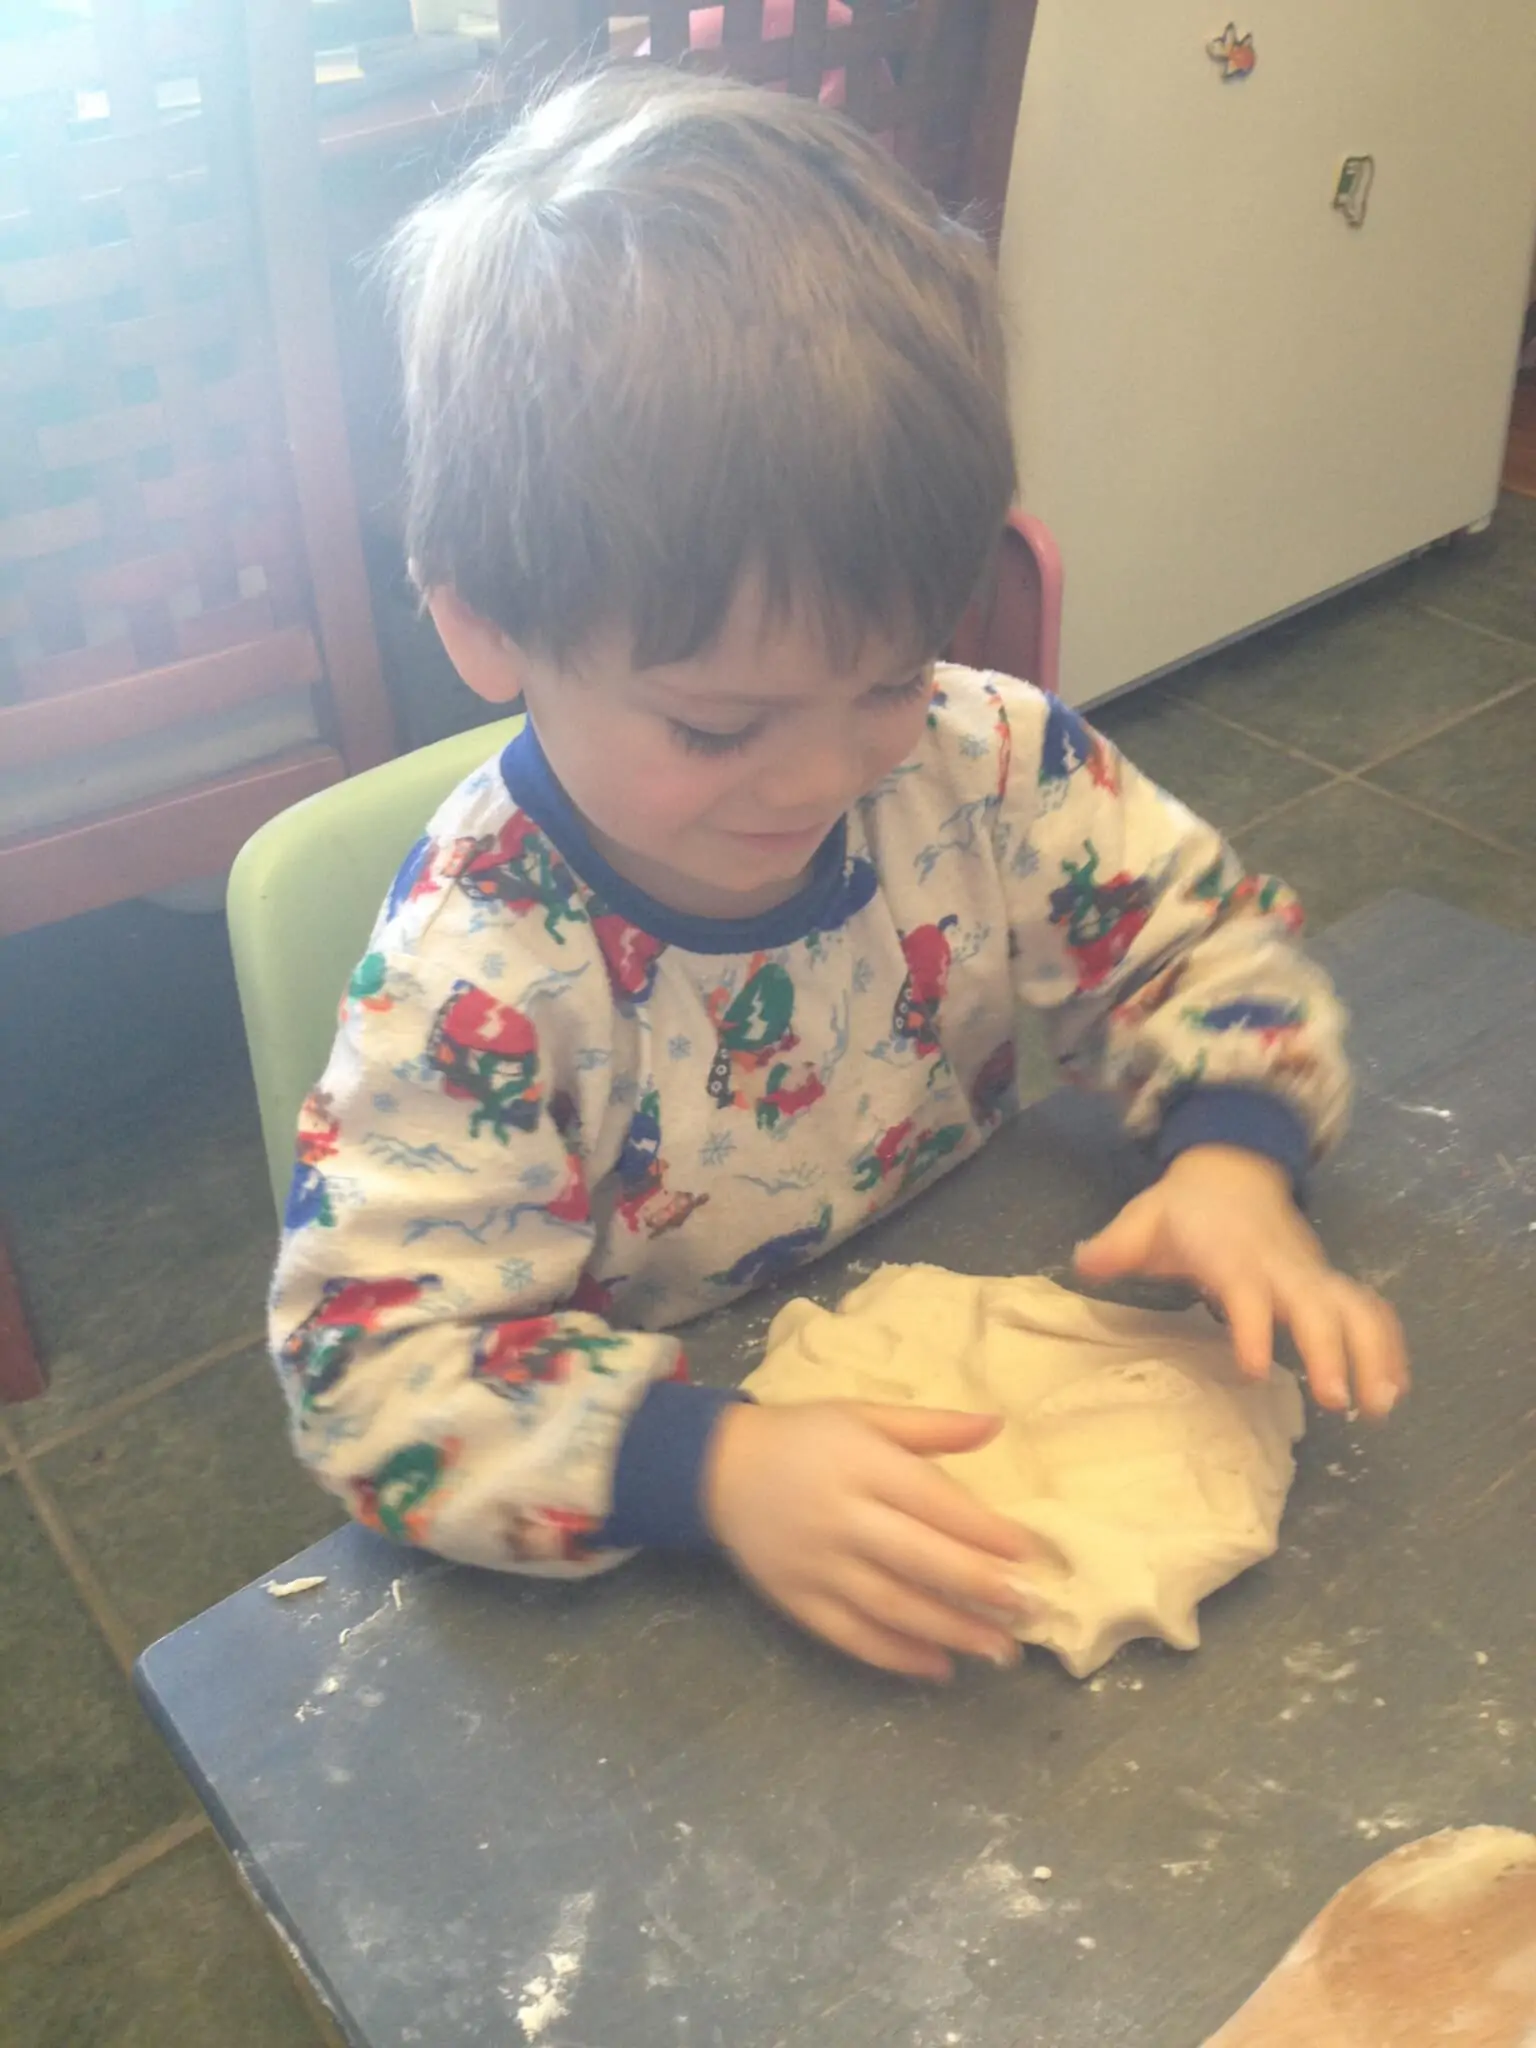 Let kids help make homemade play dough - an amazing play recipe with great sensory benefits!